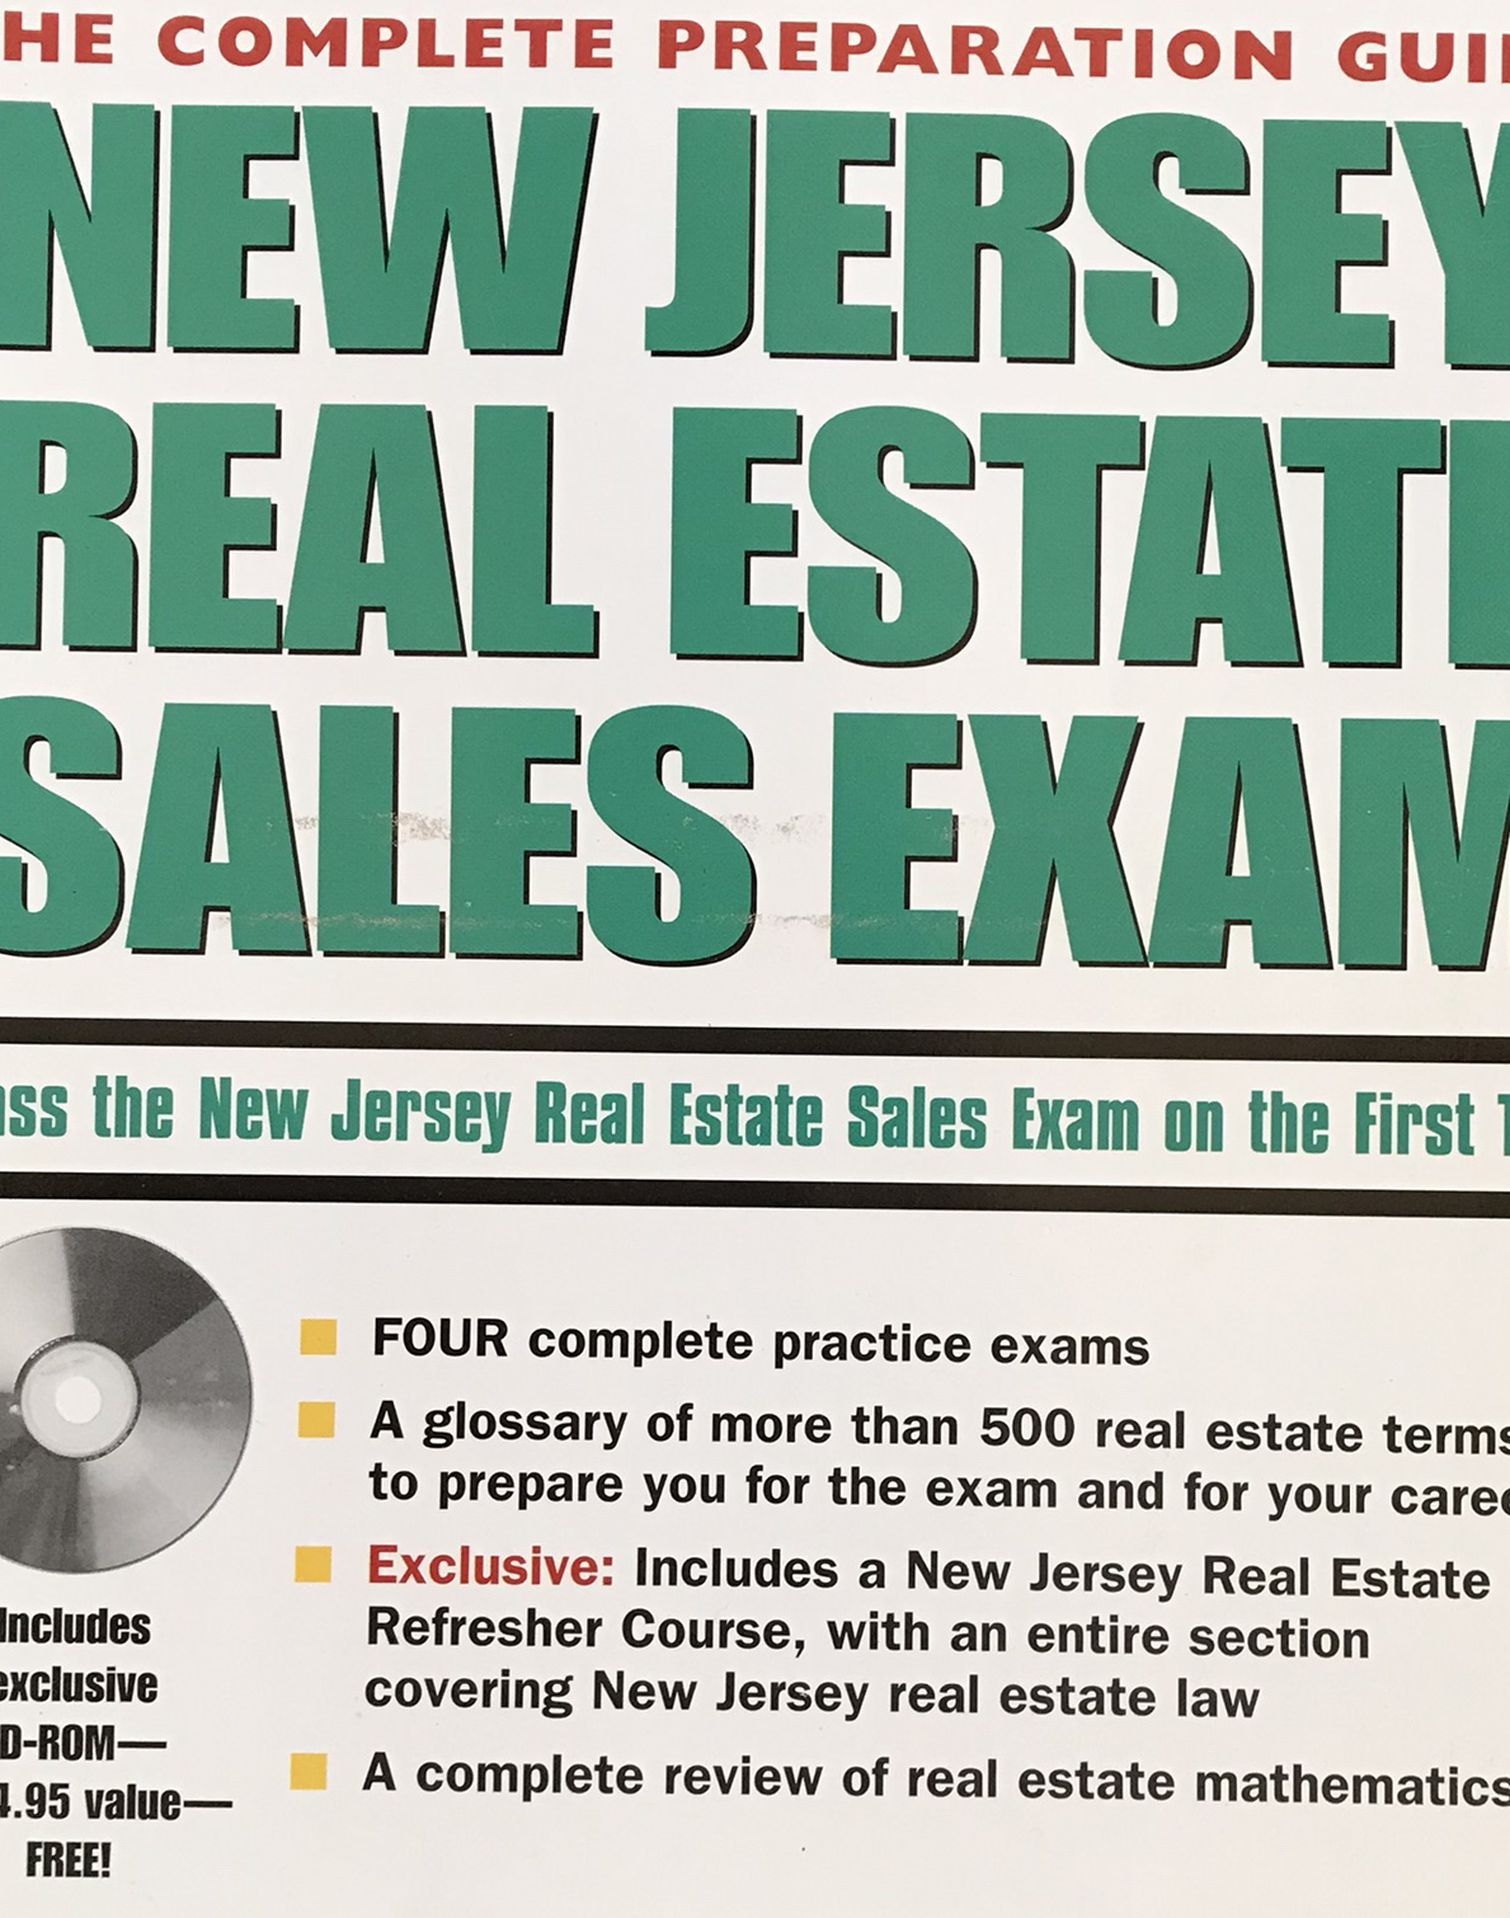 Learning Express The Complete Preparation Guide To The New Jersey Real Estate Sales Exam